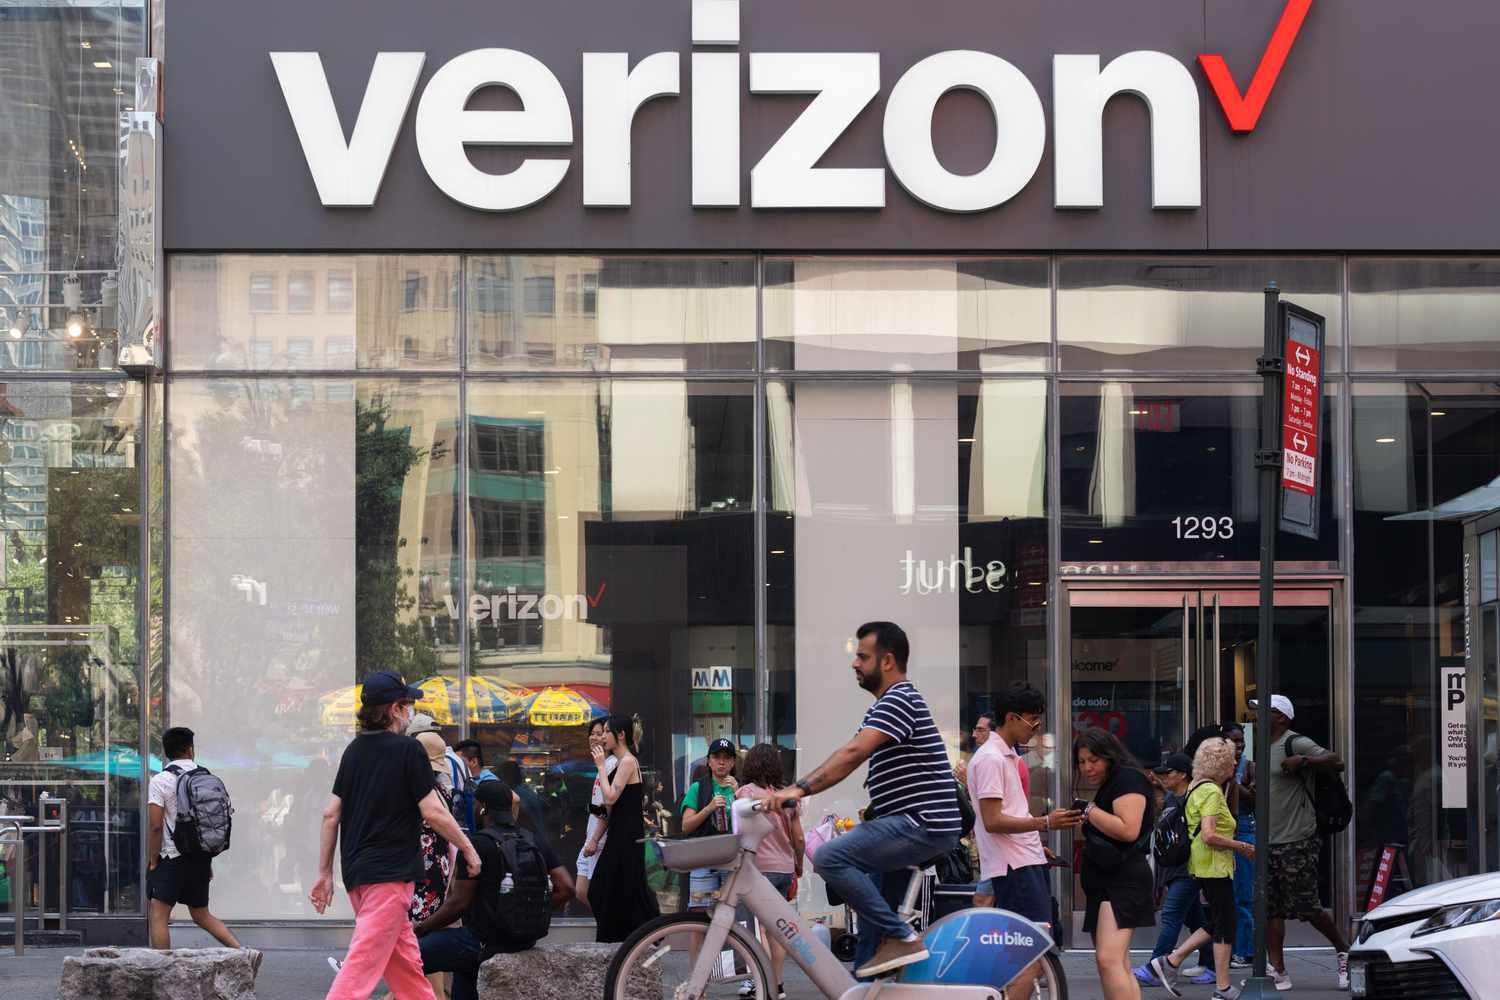 What You Need To Know Ahead of Verizon